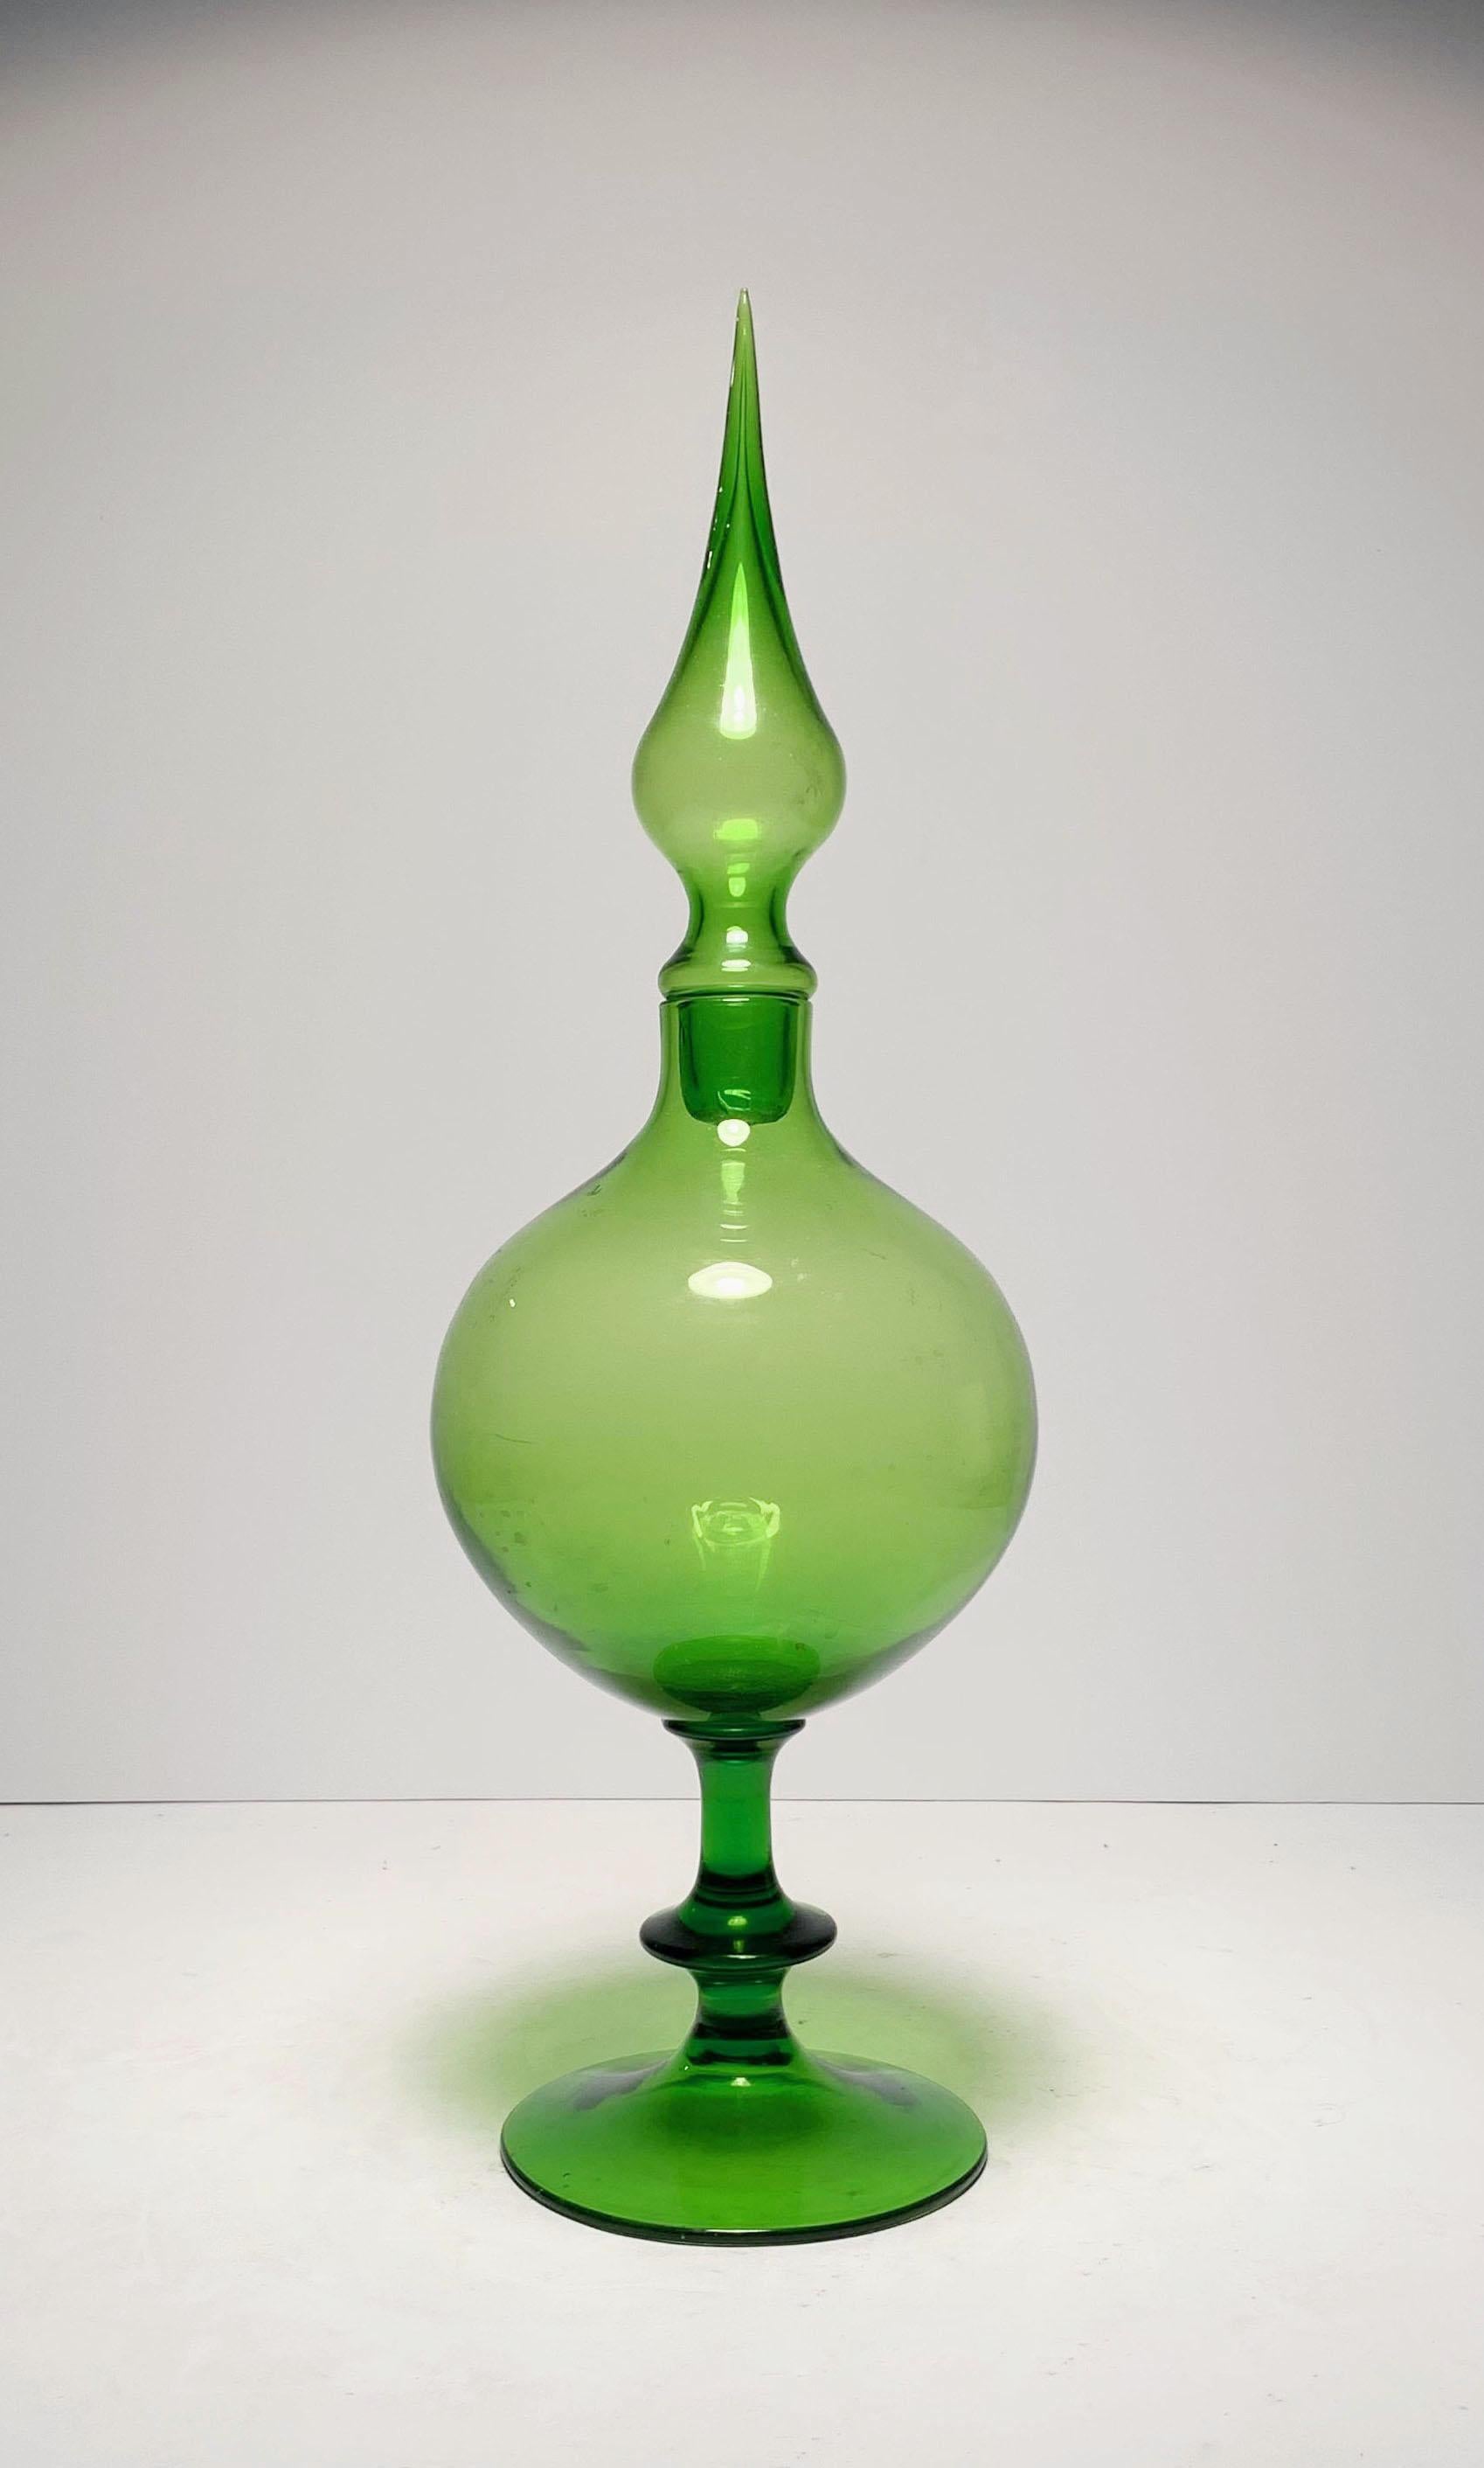 Empoli Italian glass apple green decanter with stopper.

